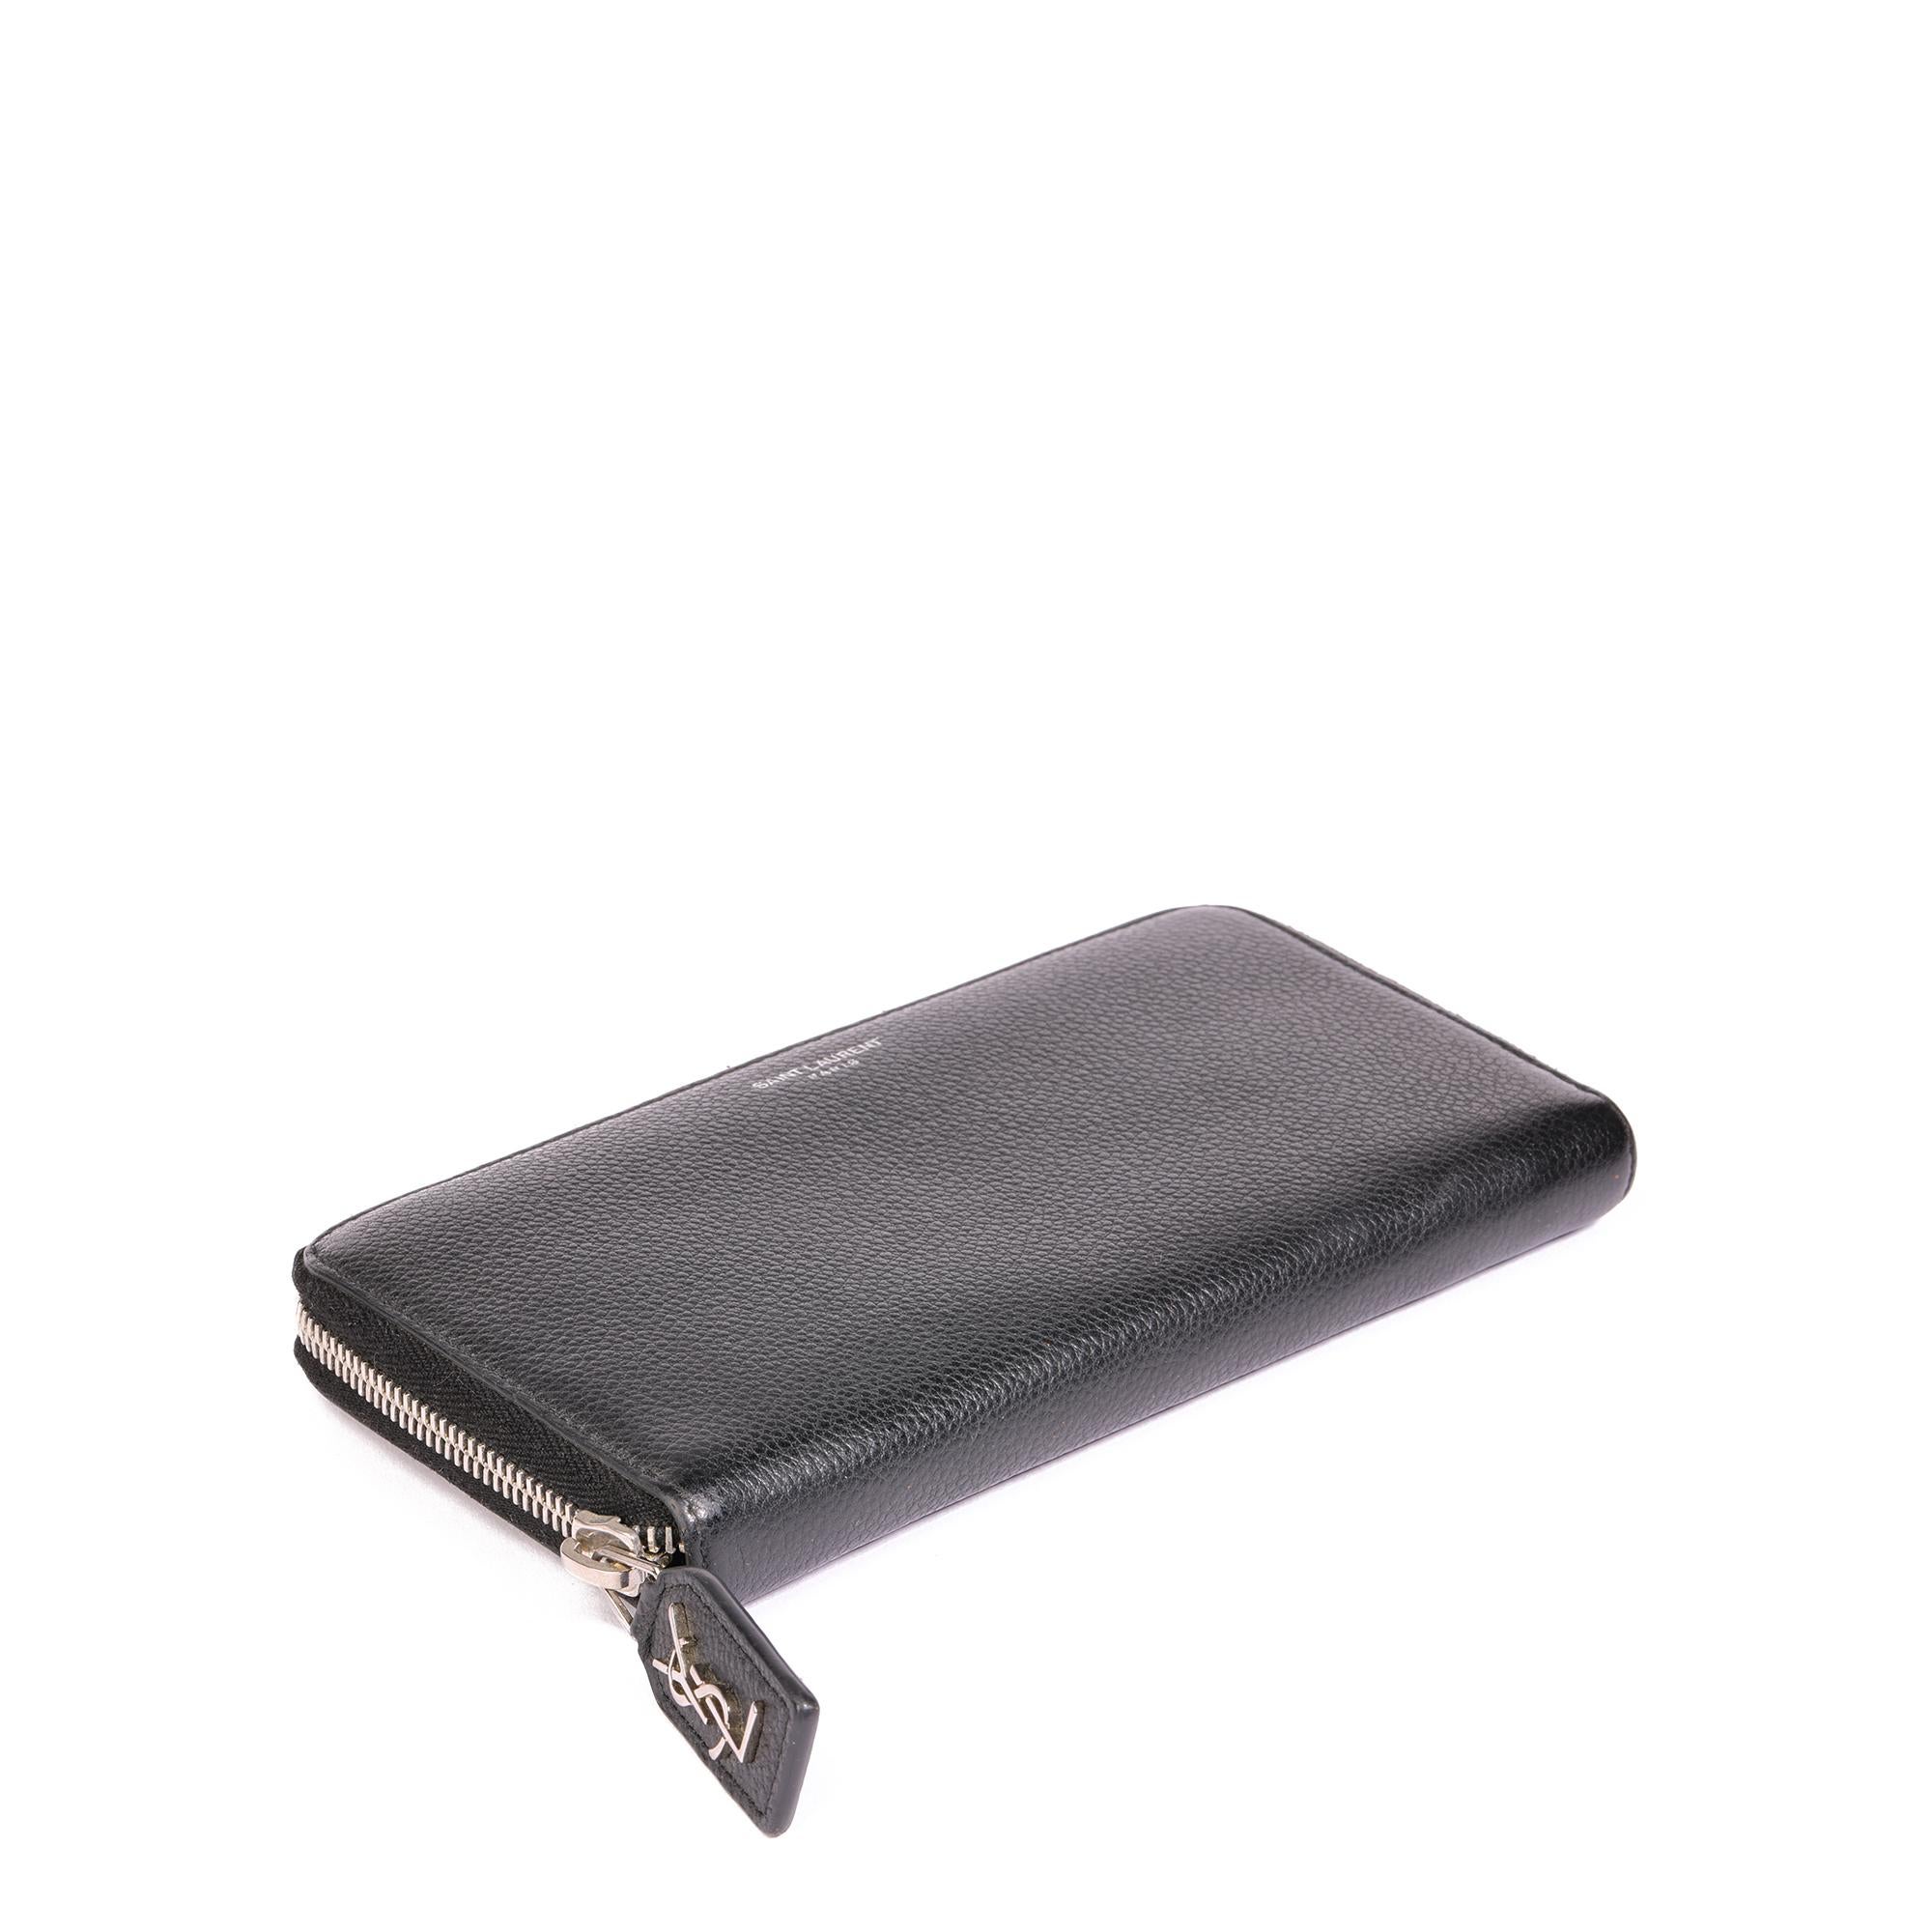 Saint Laurent Black Embossed Gauche Continental Zip Around Wallet

CONDITION NOTES
The exterior is excellent condition with light signs of use.
The interior is in excellent condition with light signs of use.
The hardware is in excellent condition